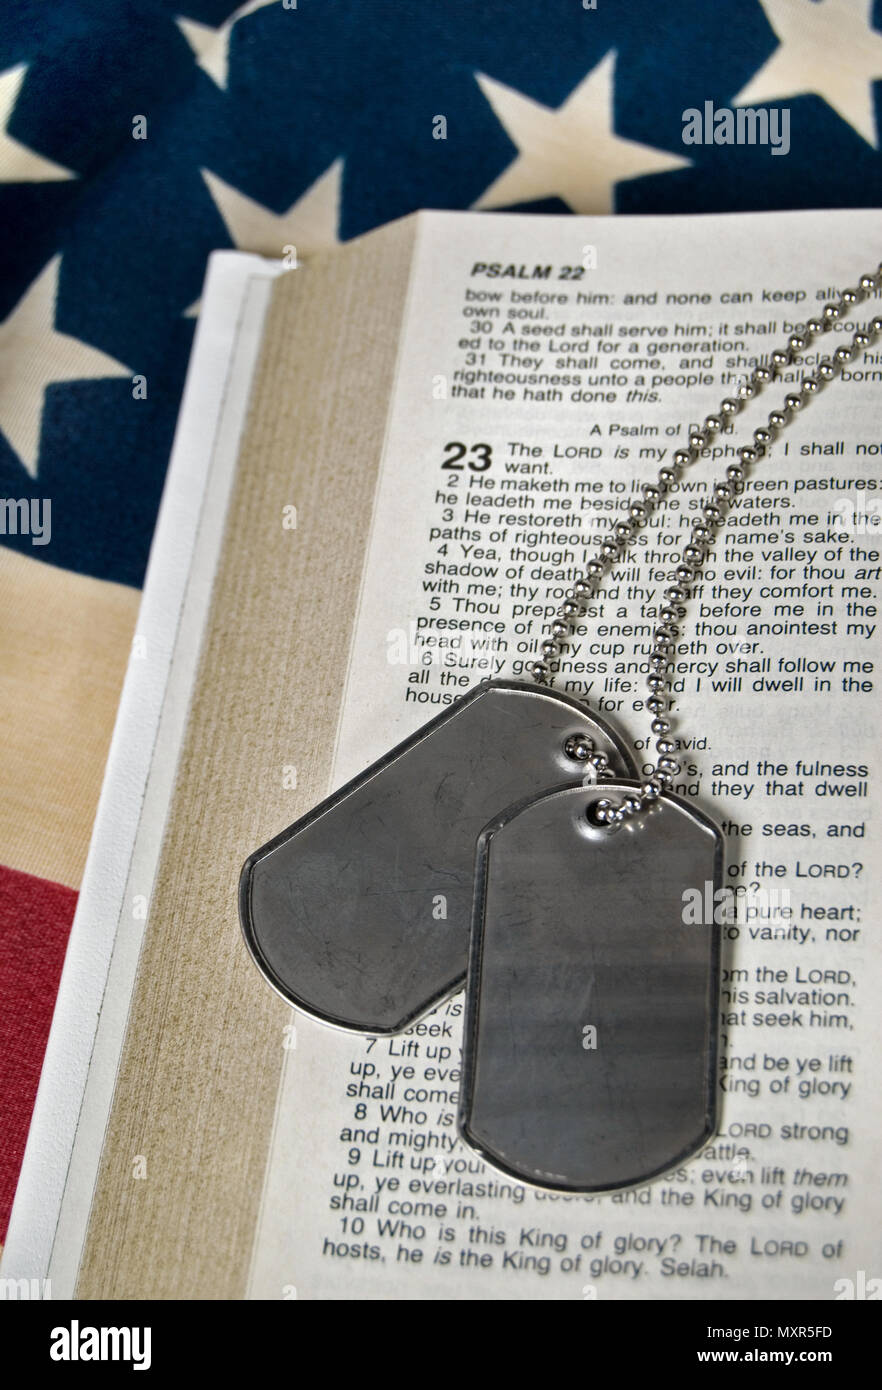 Military dog tags on Holy Bible opened to Psalm 23 Stock Photo